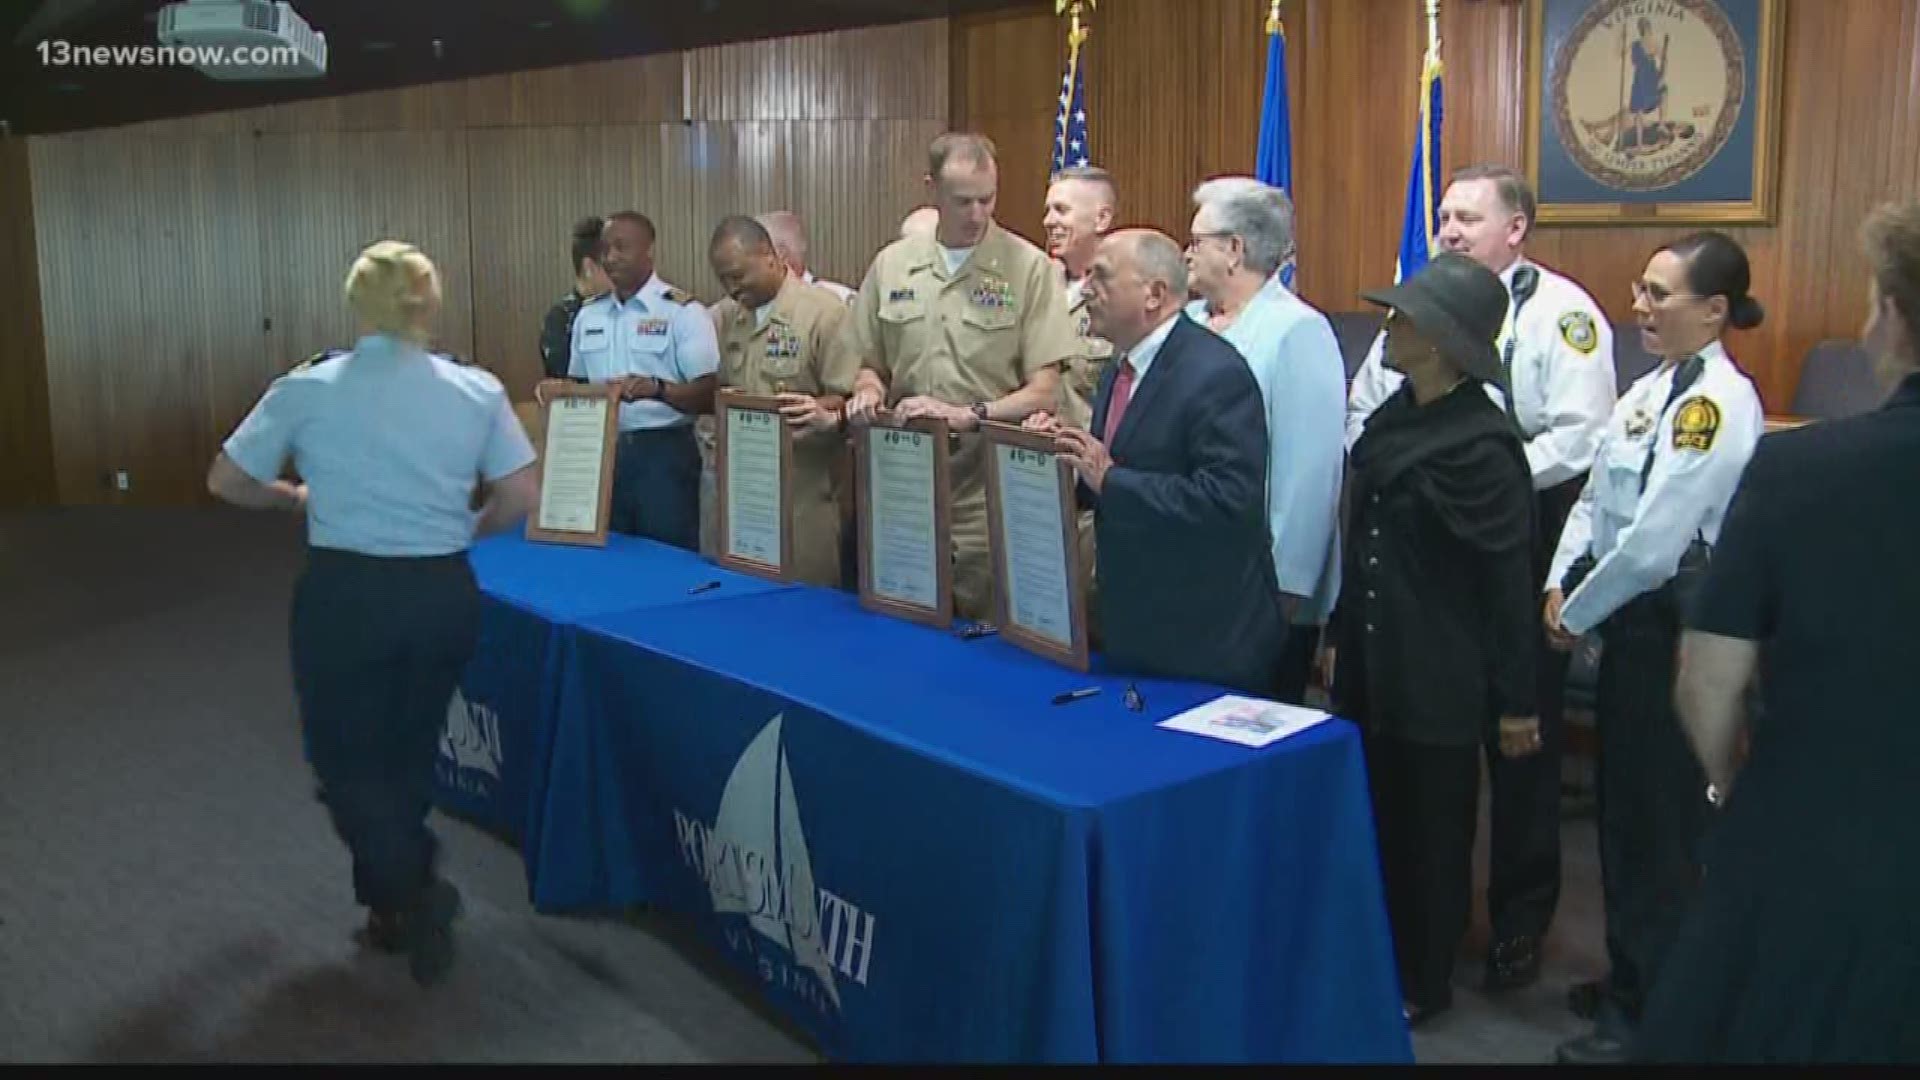 The City of Portsmouth, the Navy, and the Coast Guard officially joined forces.